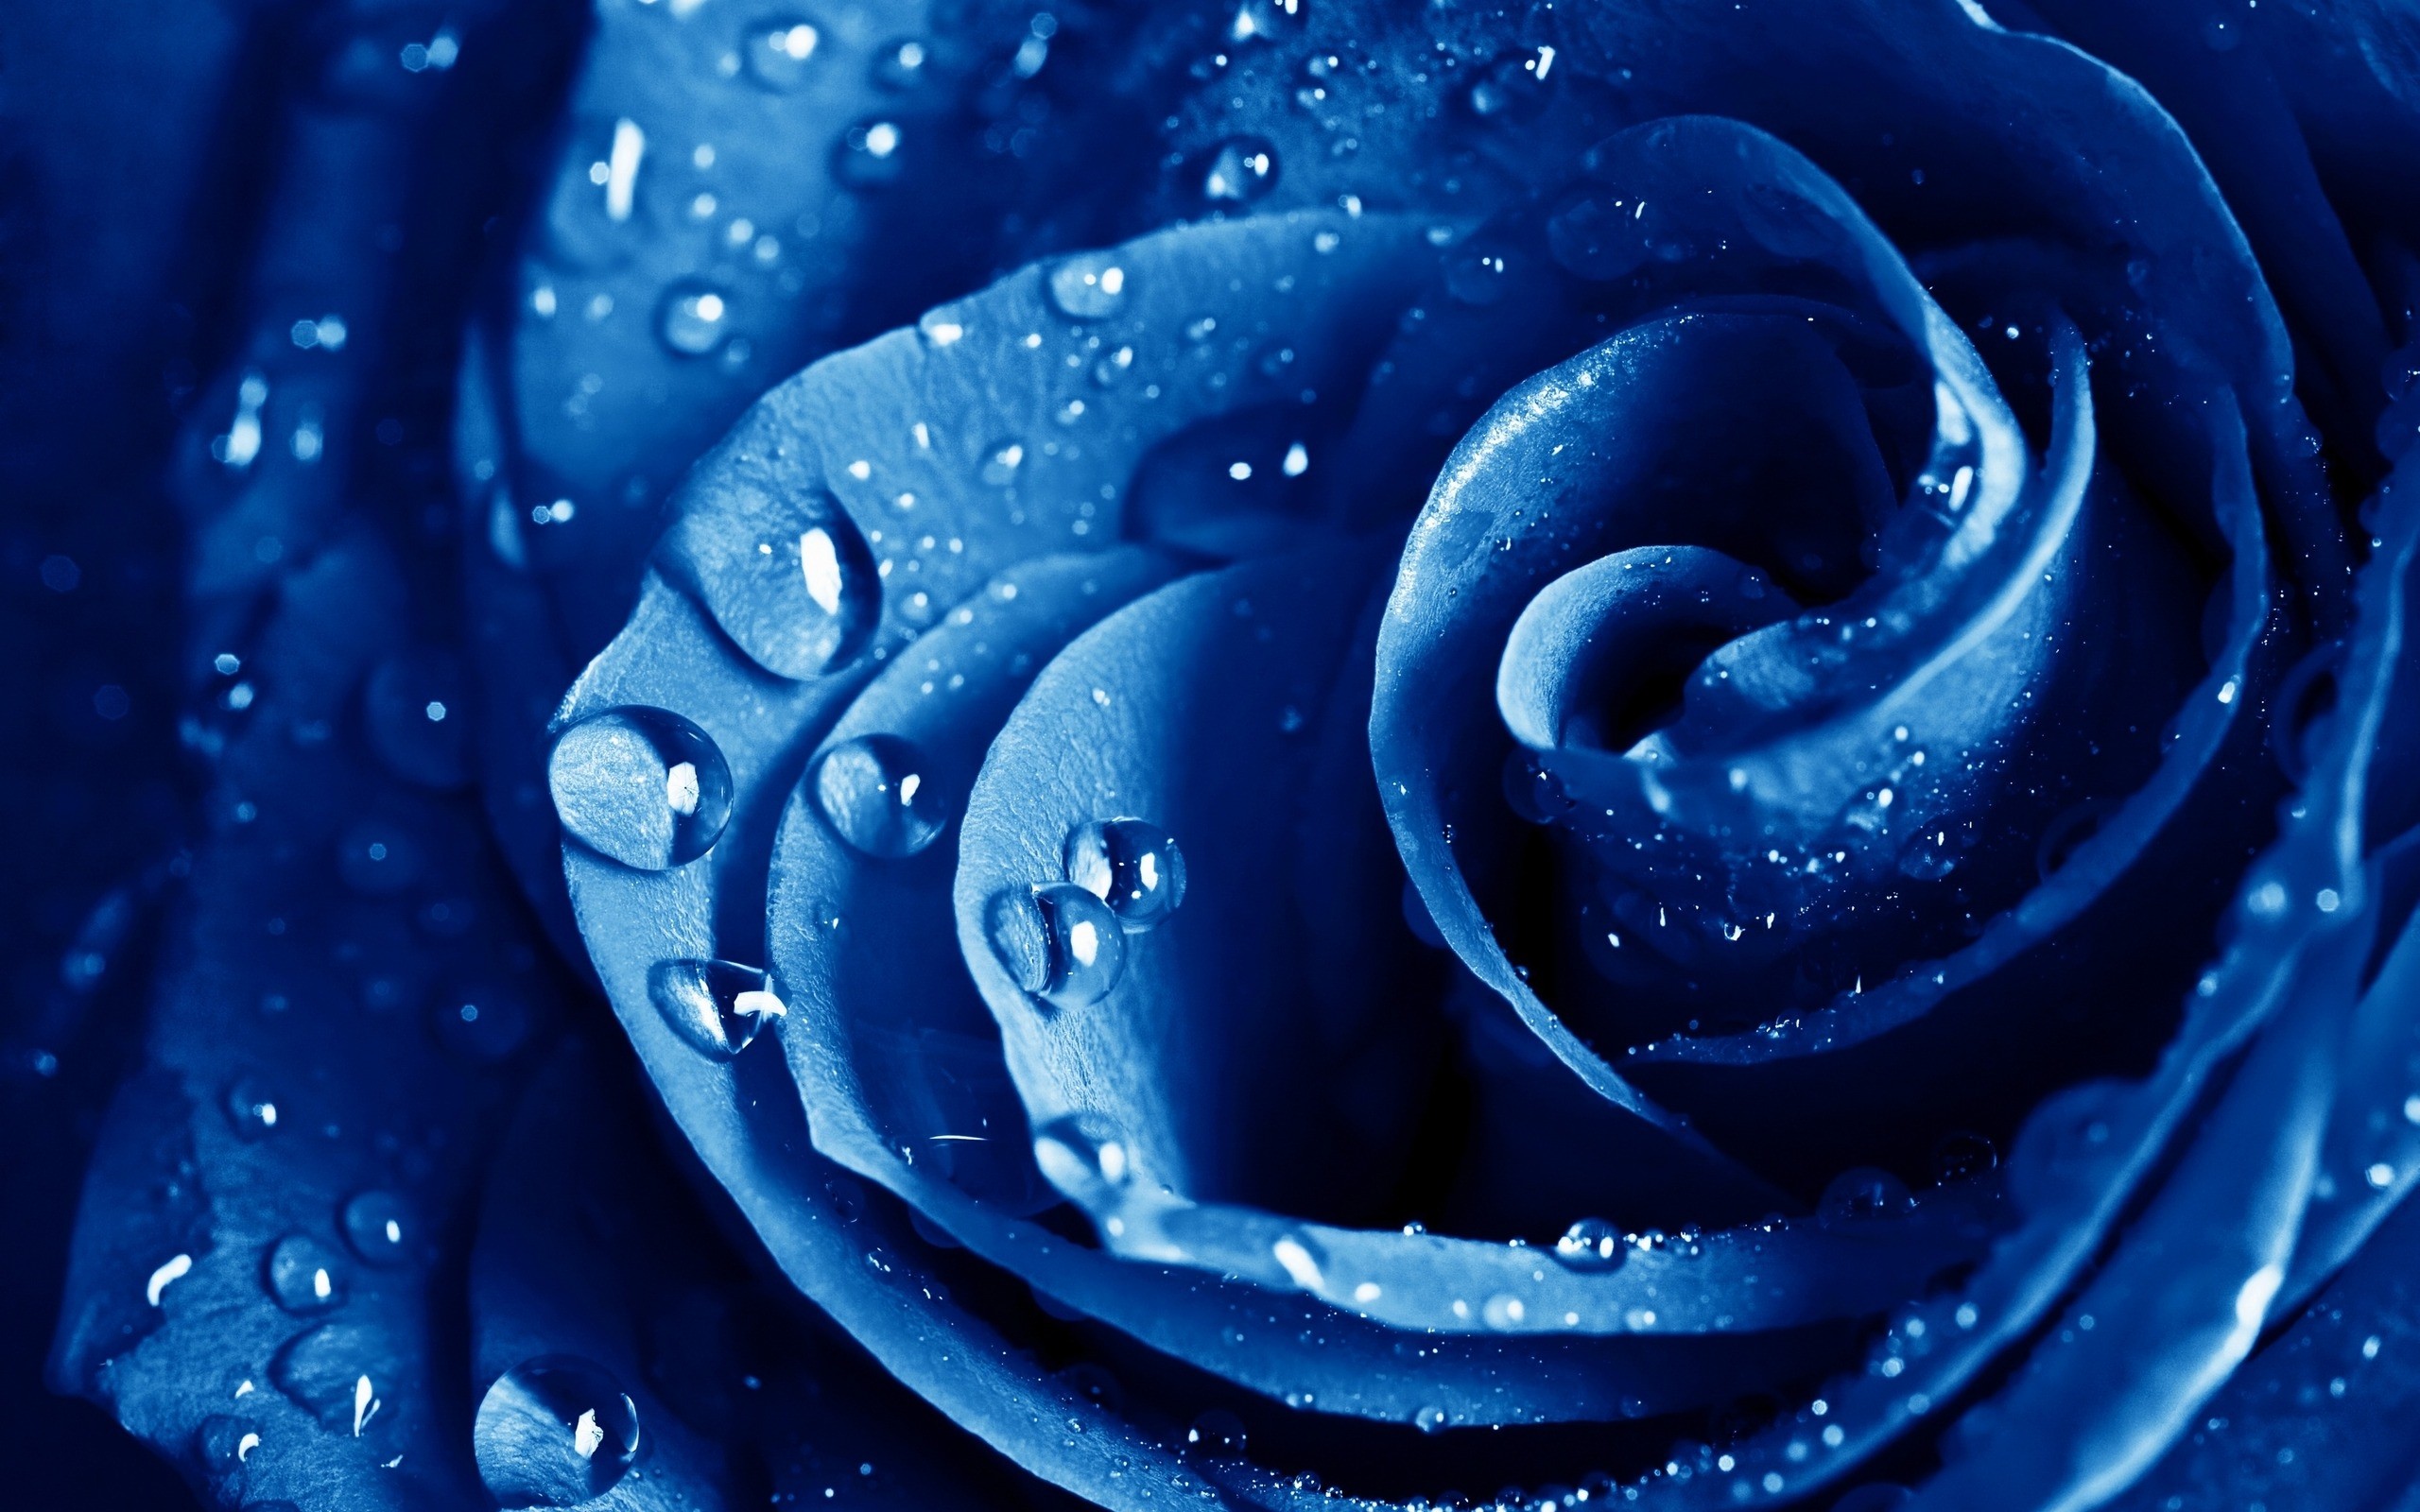 Magnificent Hqfx Images Of Blue Water, Px - Blue Rose In Rain - HD Wallpaper 